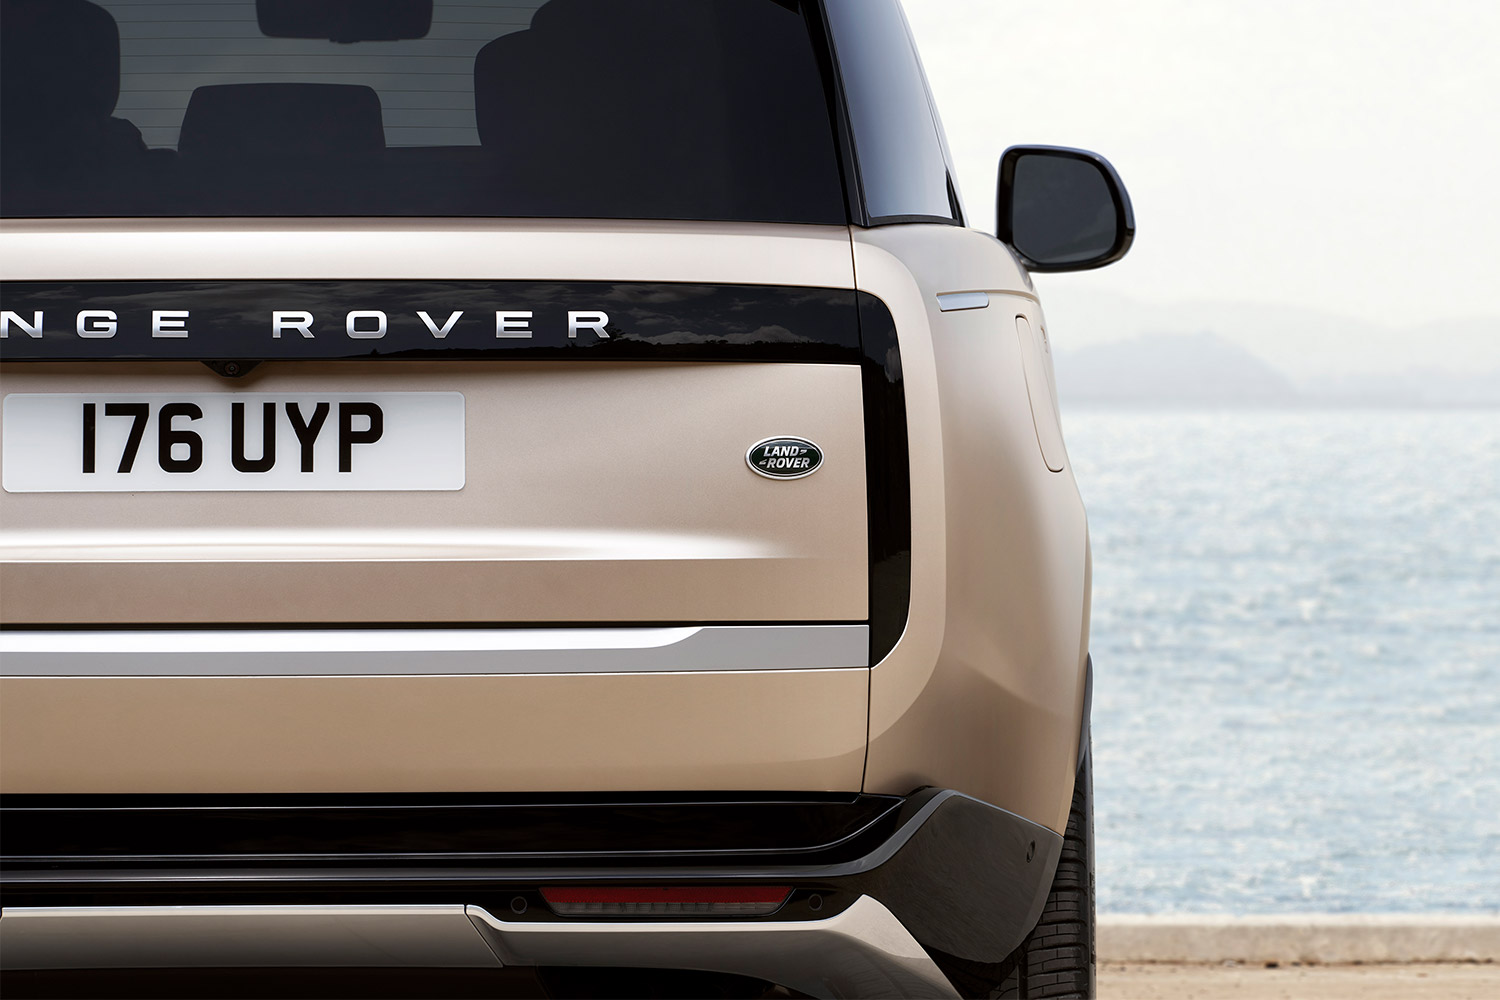 The rear end of the new 2023 Range Rover